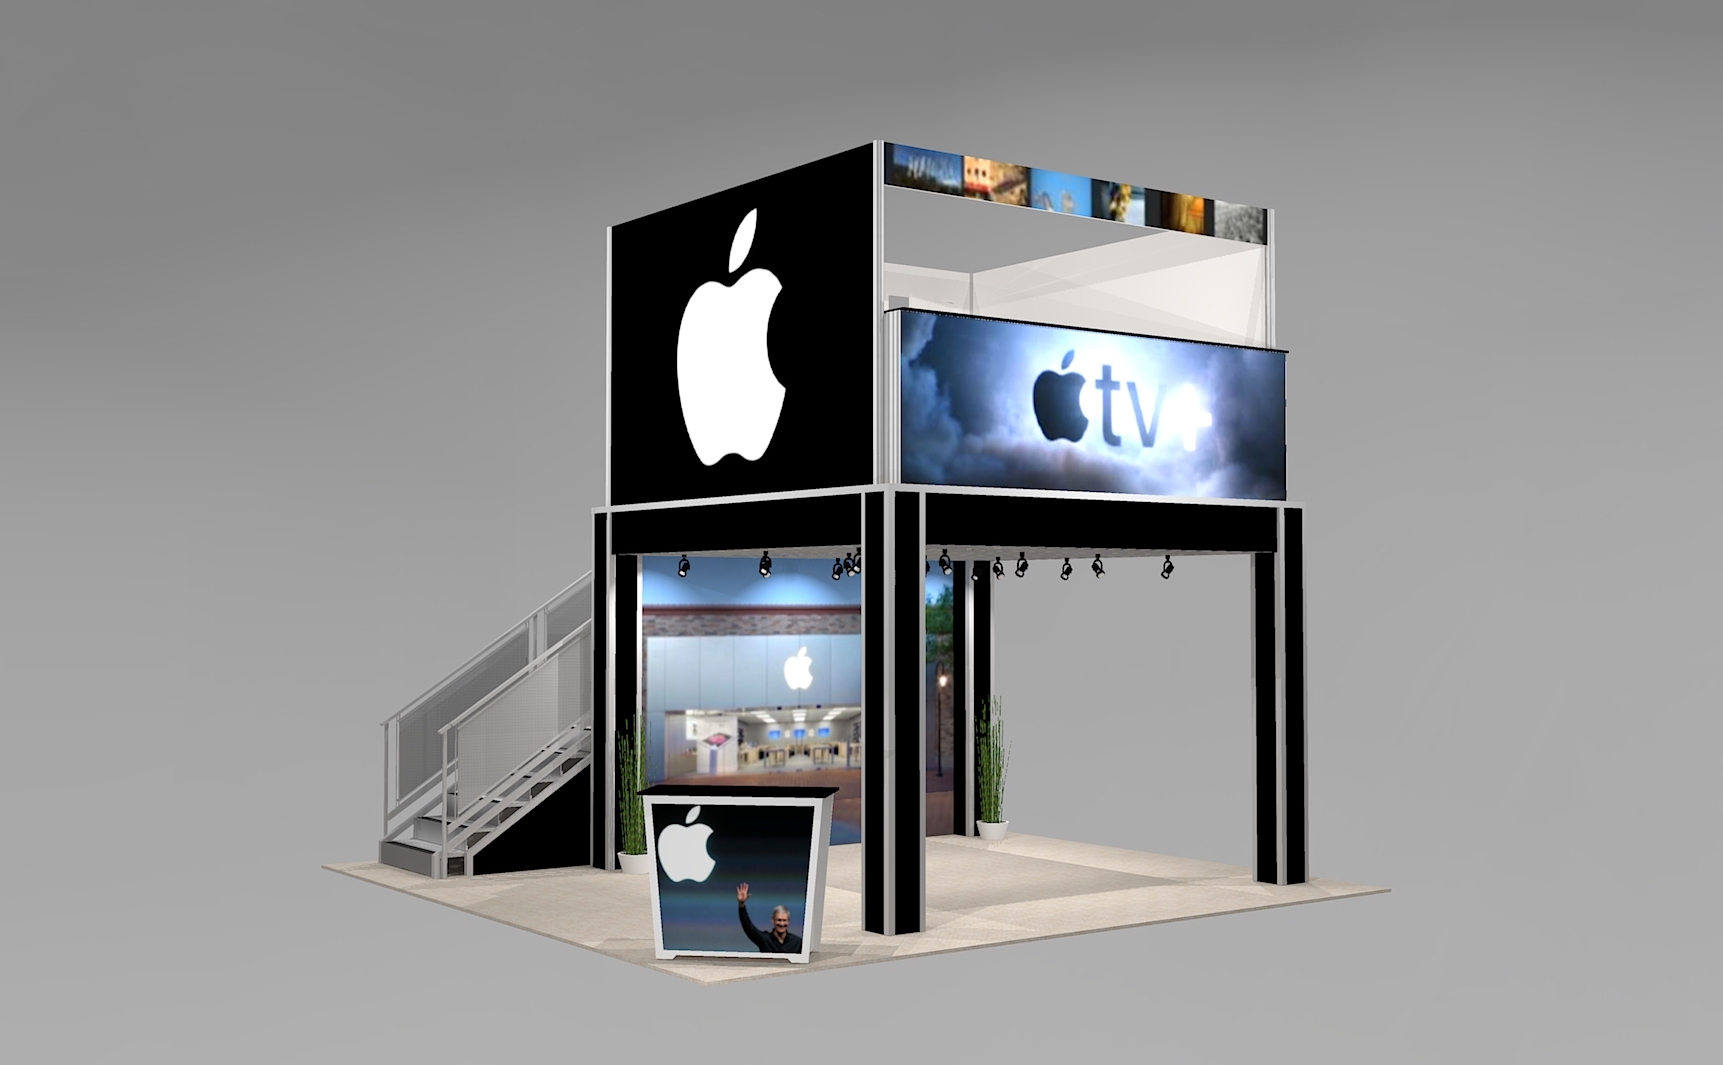 Double Deck for 20 ft. Trade Show Space with Meeting Room and Large Logo Signs